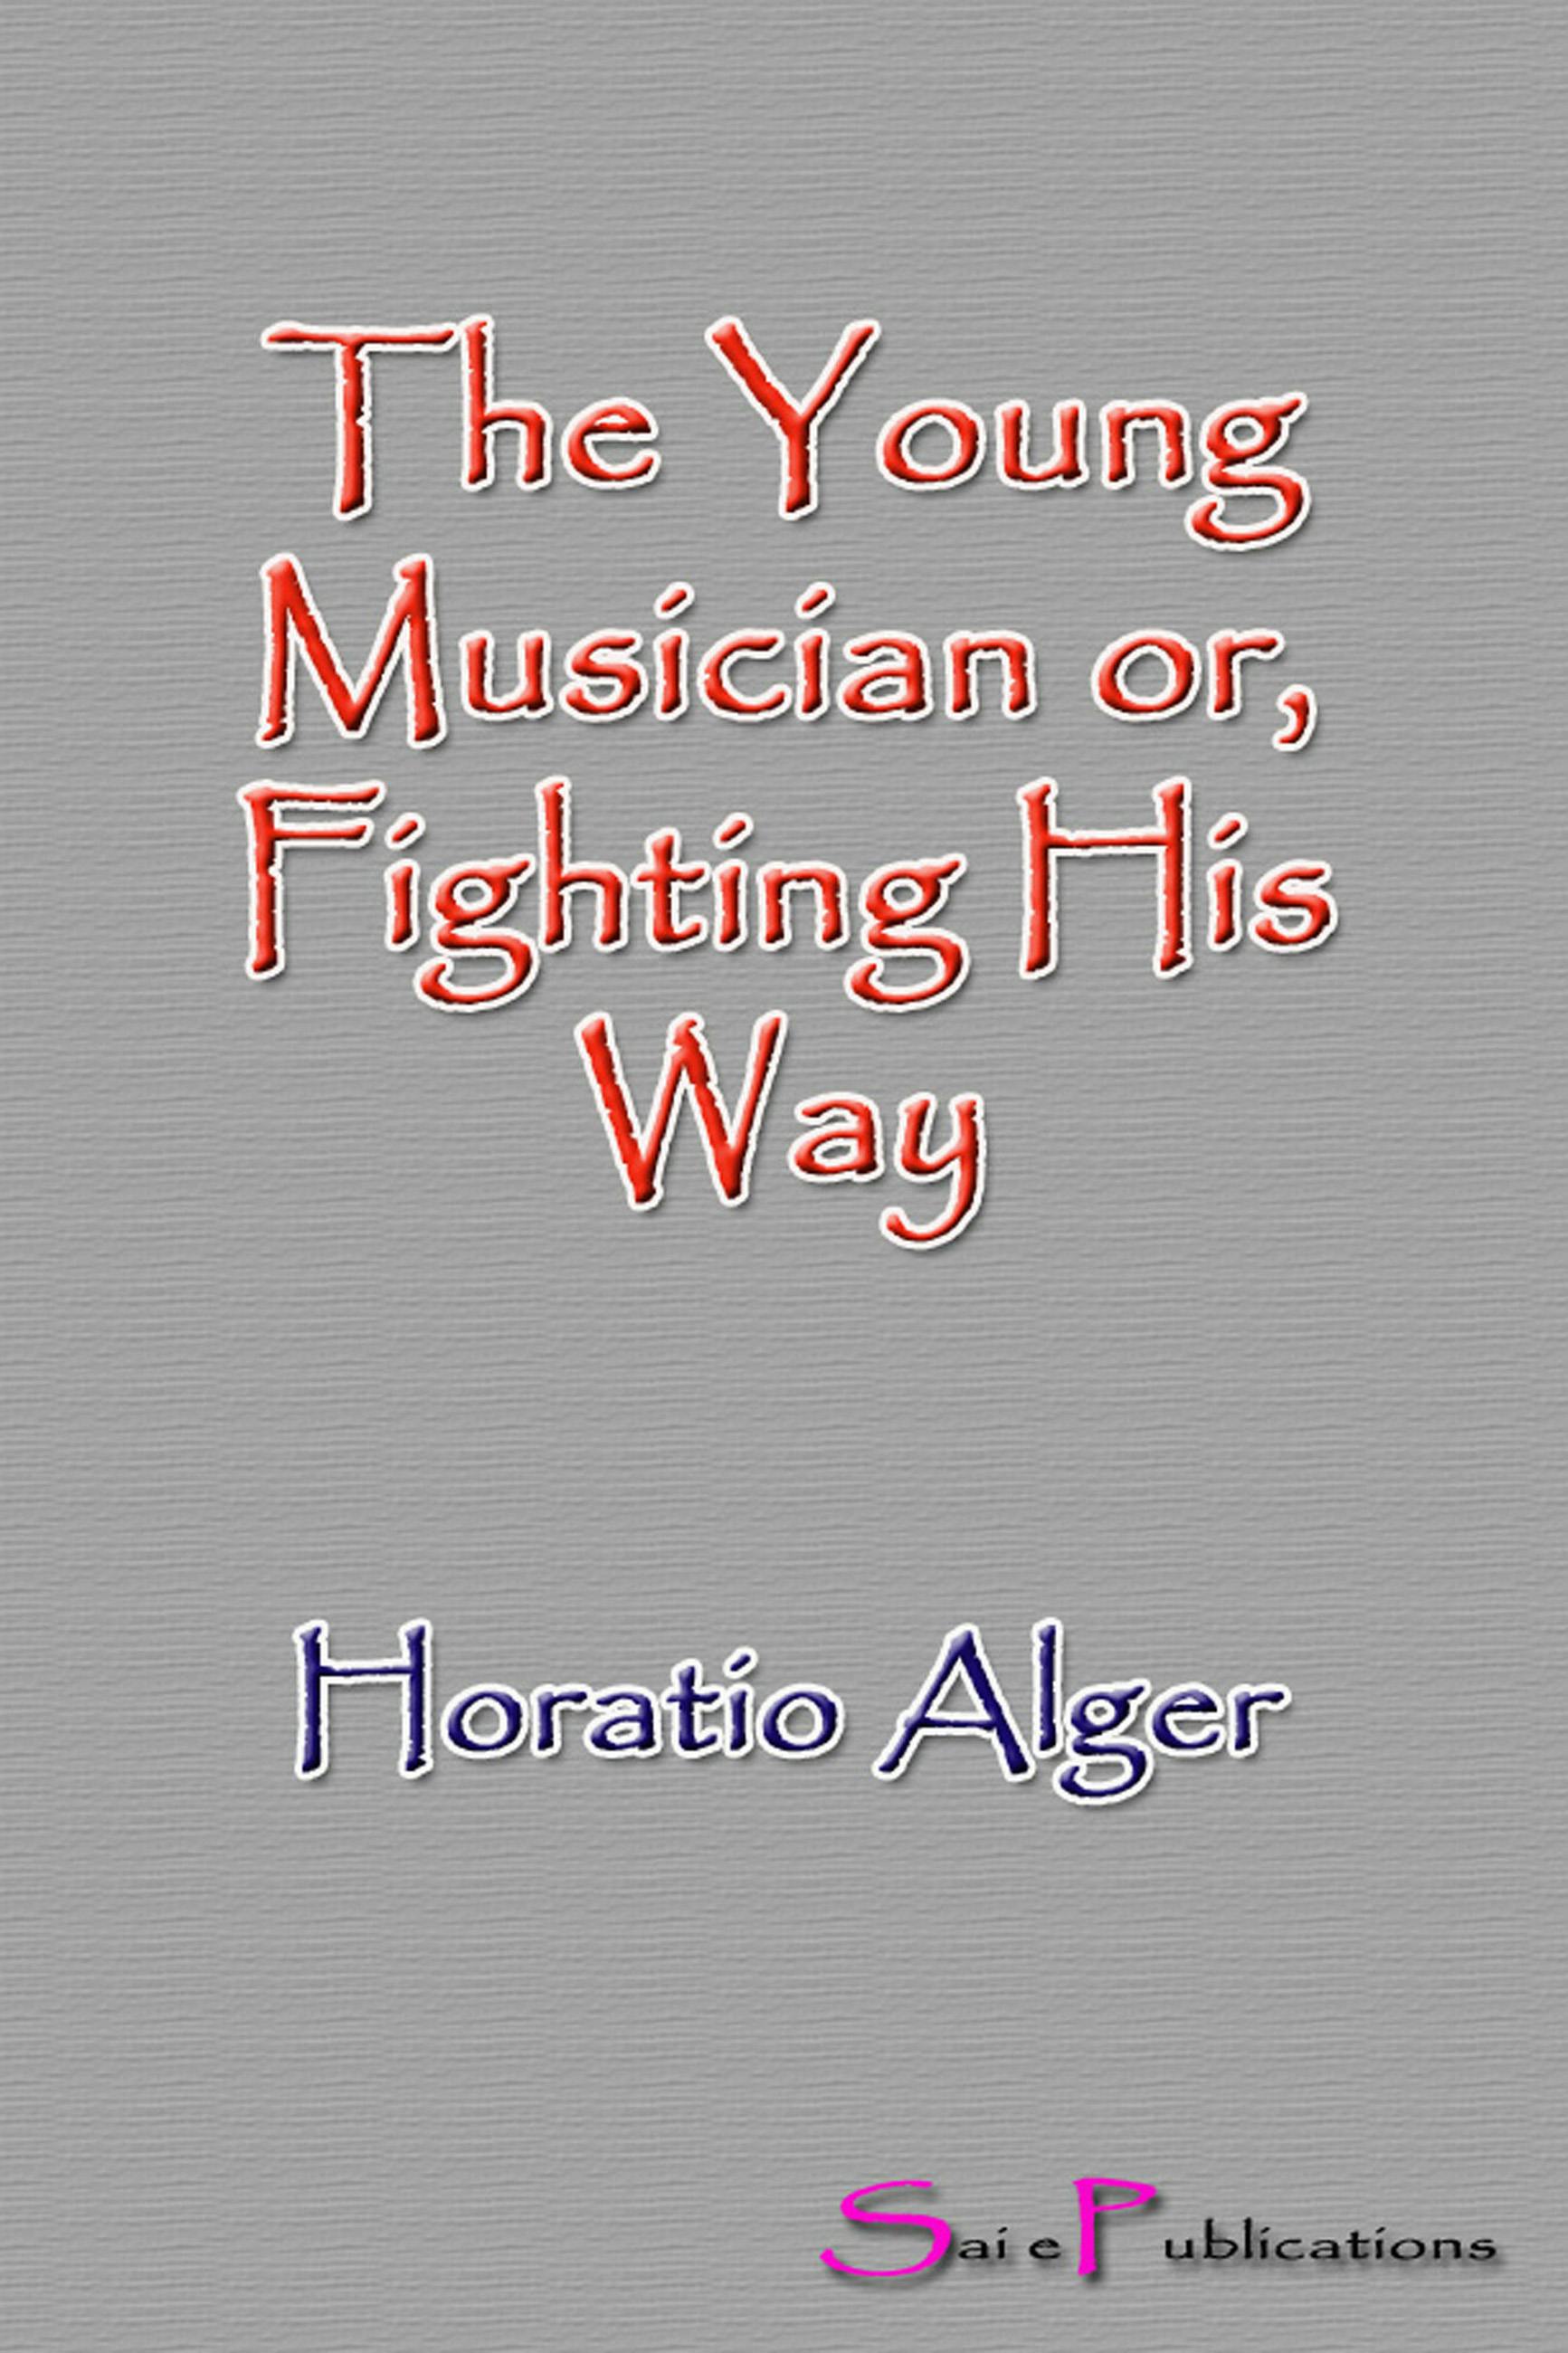 The Young Musician or, Fighting His Way - Horatio Alger